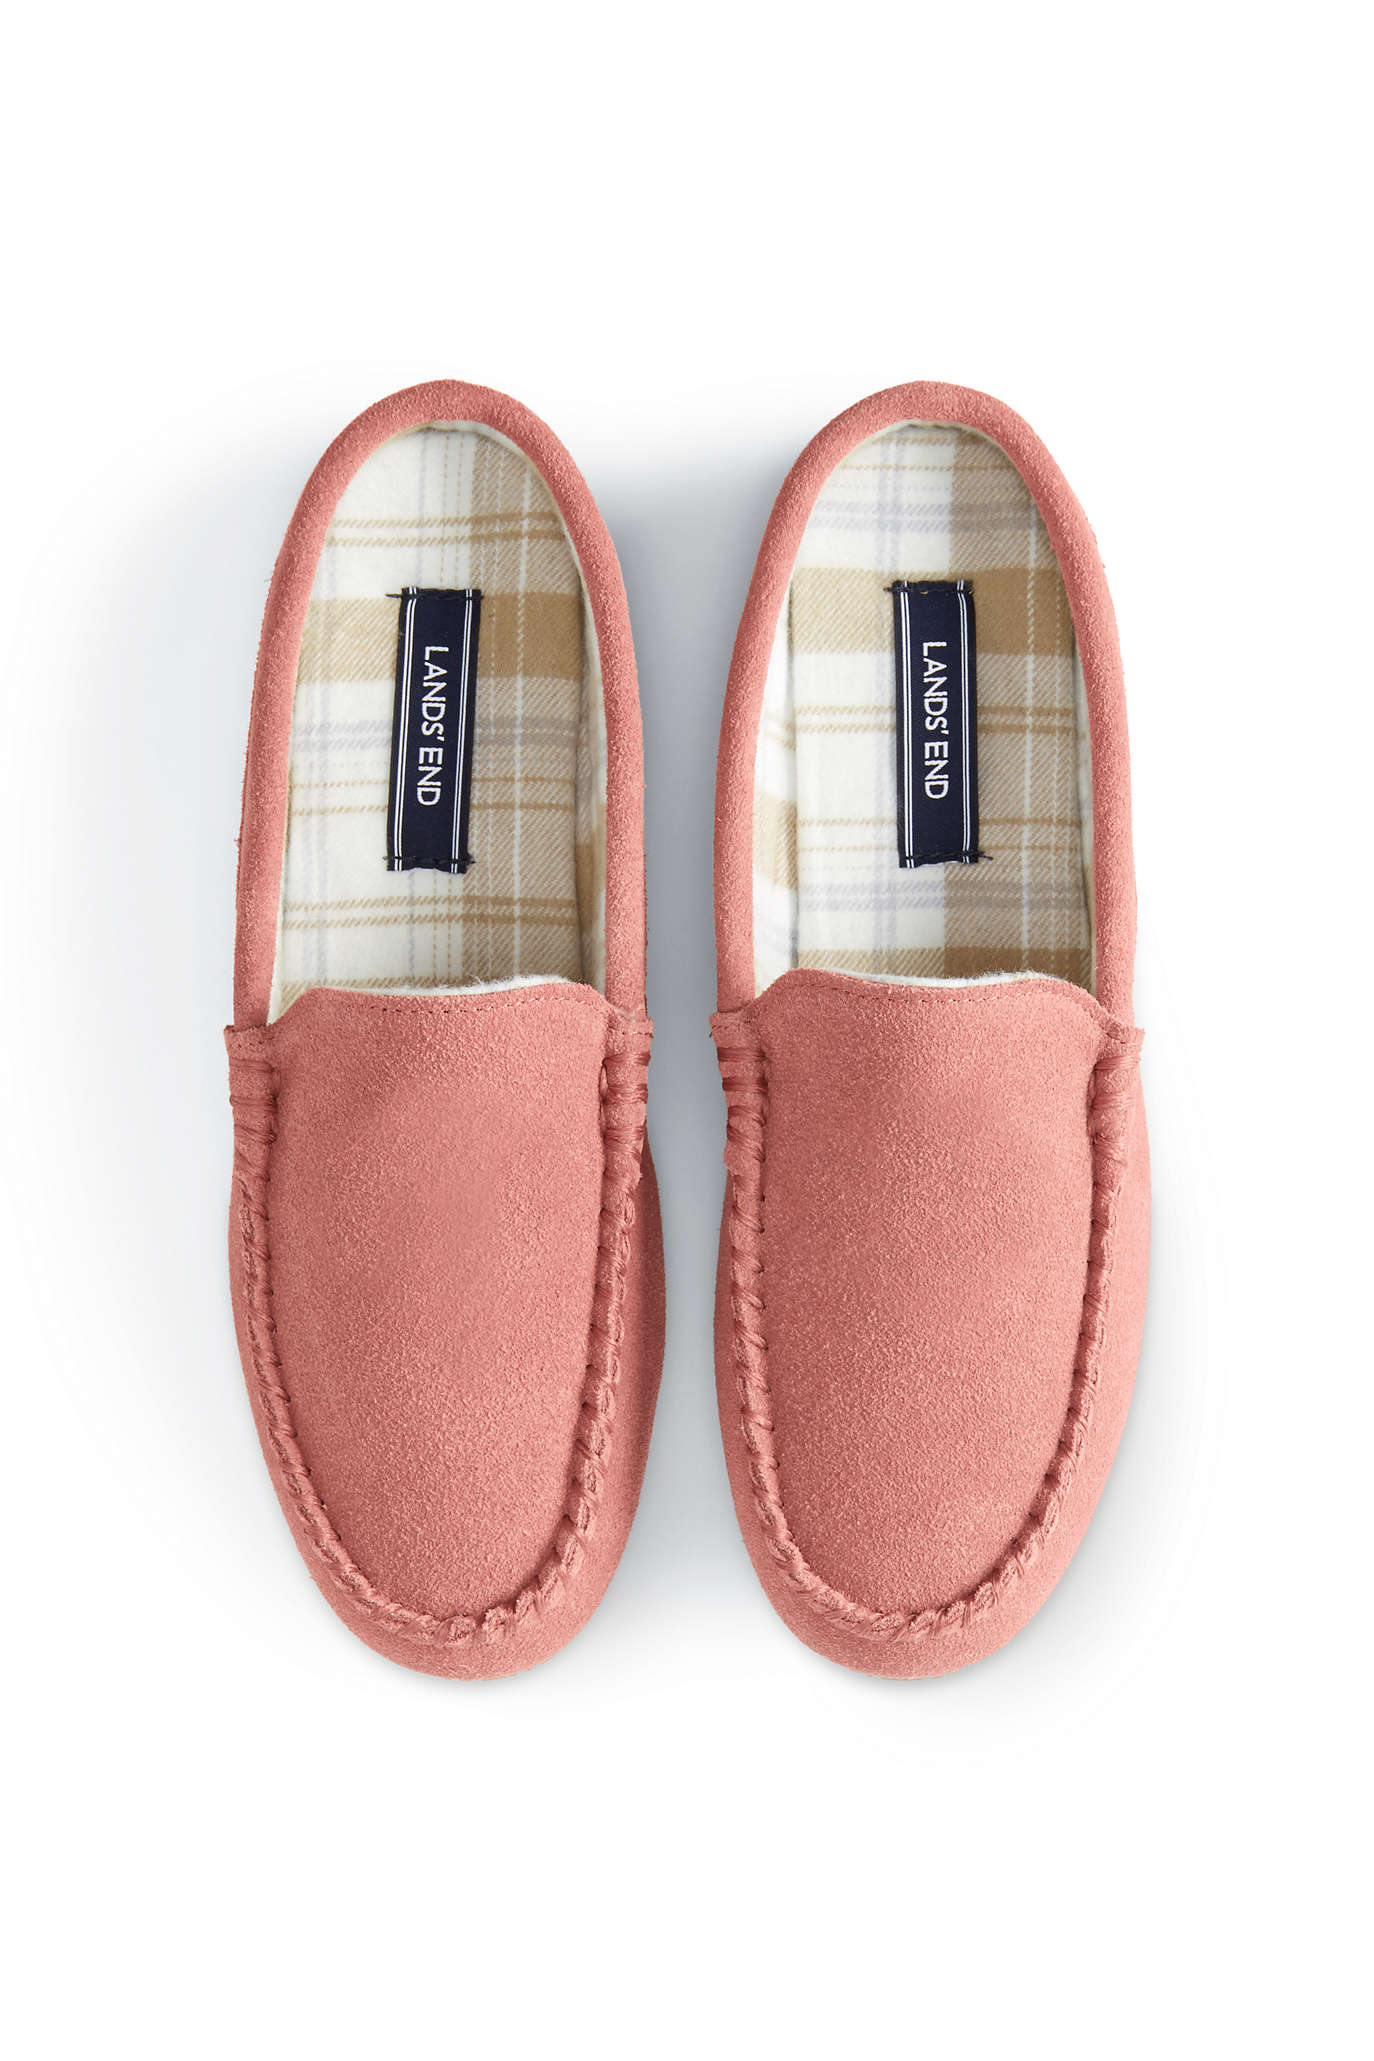 Women's Suede Clog Moccasin Slippers